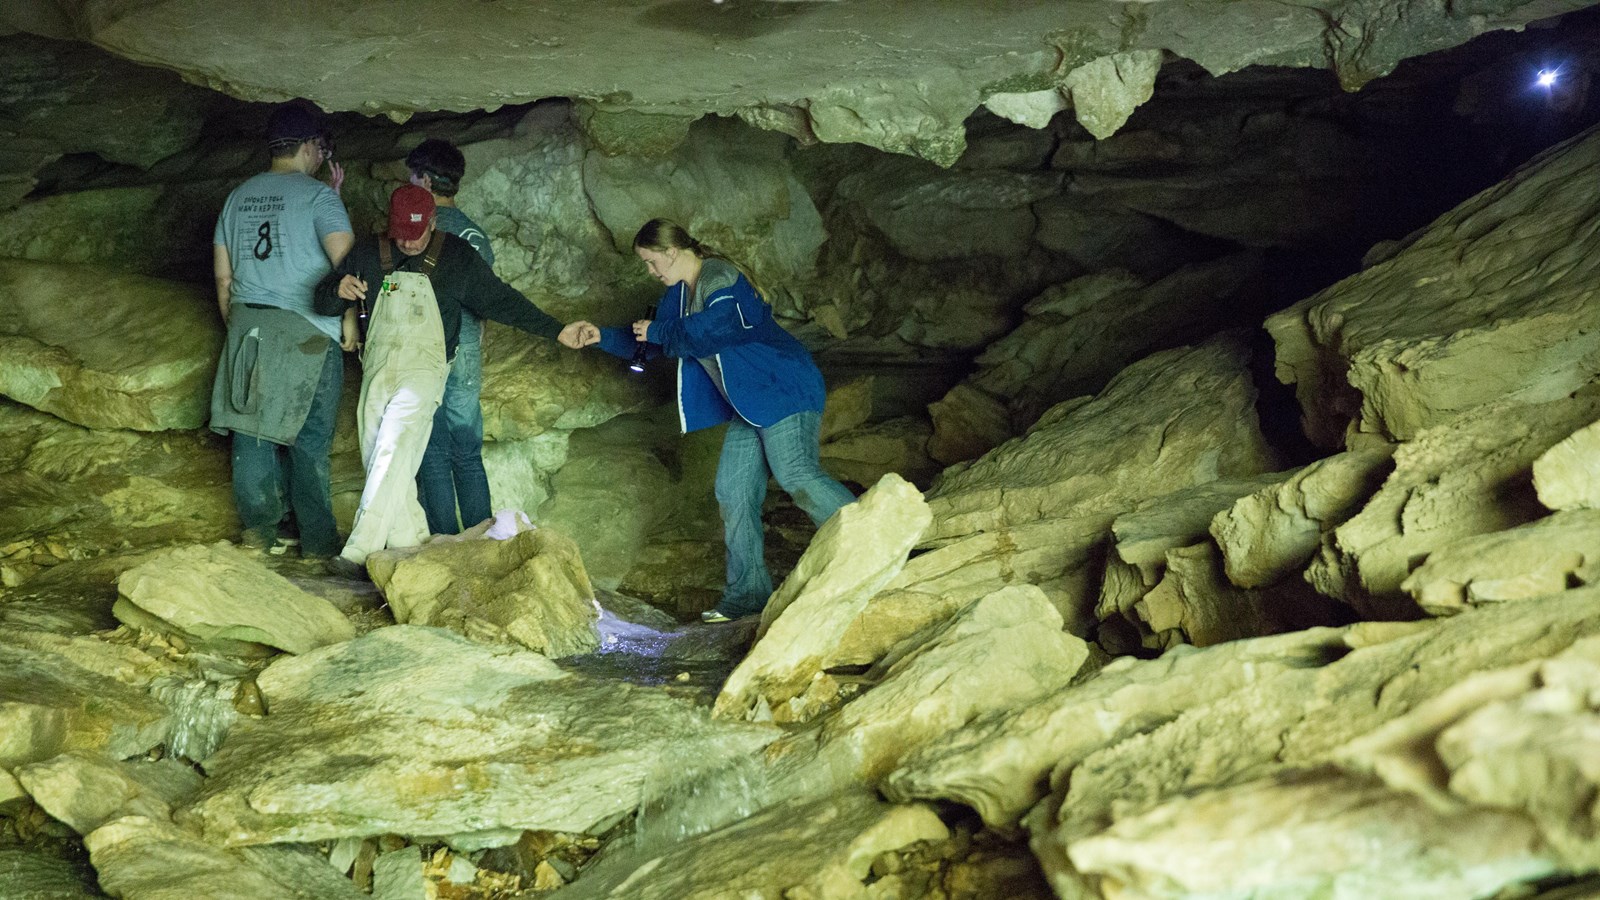 Cavers entering and exiting Eden Falls Cave. A flashlight shines toward us from a dark passage.